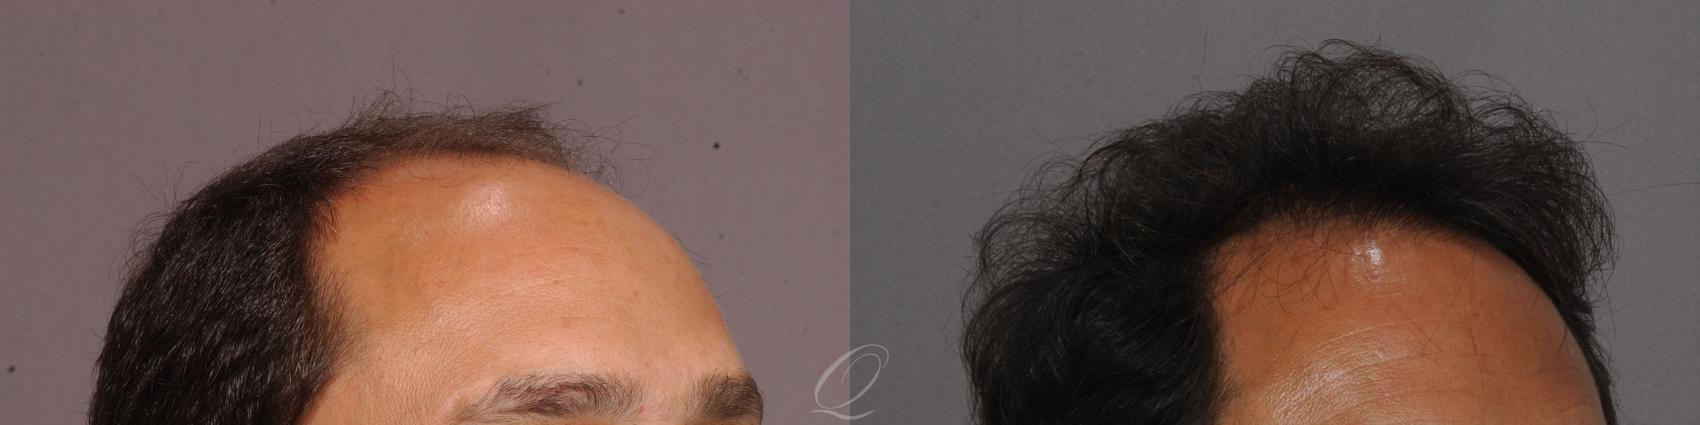 FUT Case 1045 Before & After View #3 | Rochester, Buffalo, & Syracuse, NY | Quatela Center for Hair Restoration